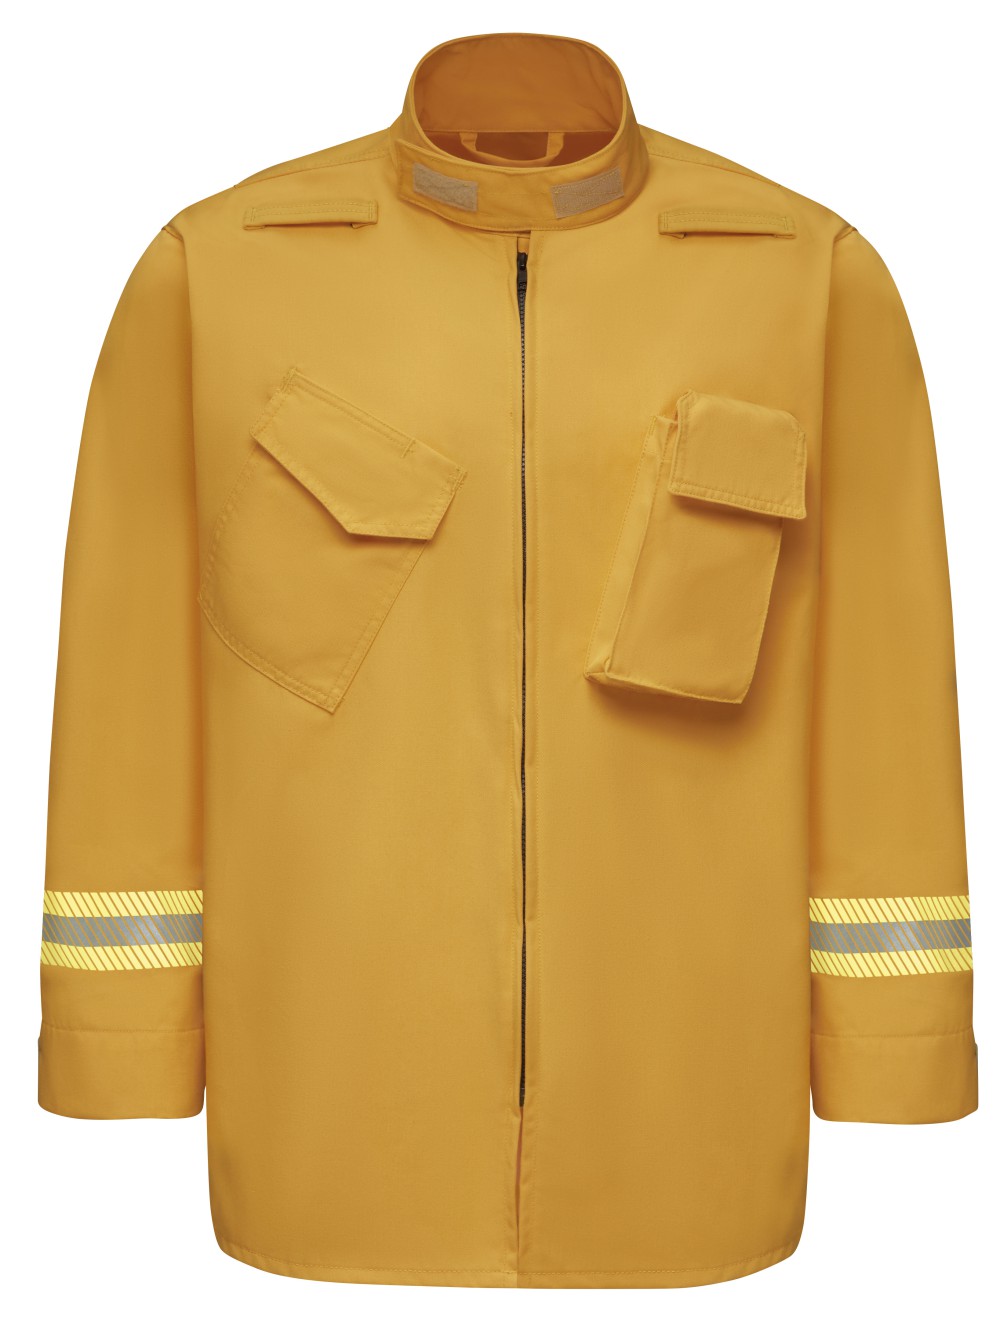 Men's Relaxed Fit Wildland Jacket | Work Hard Dress Right